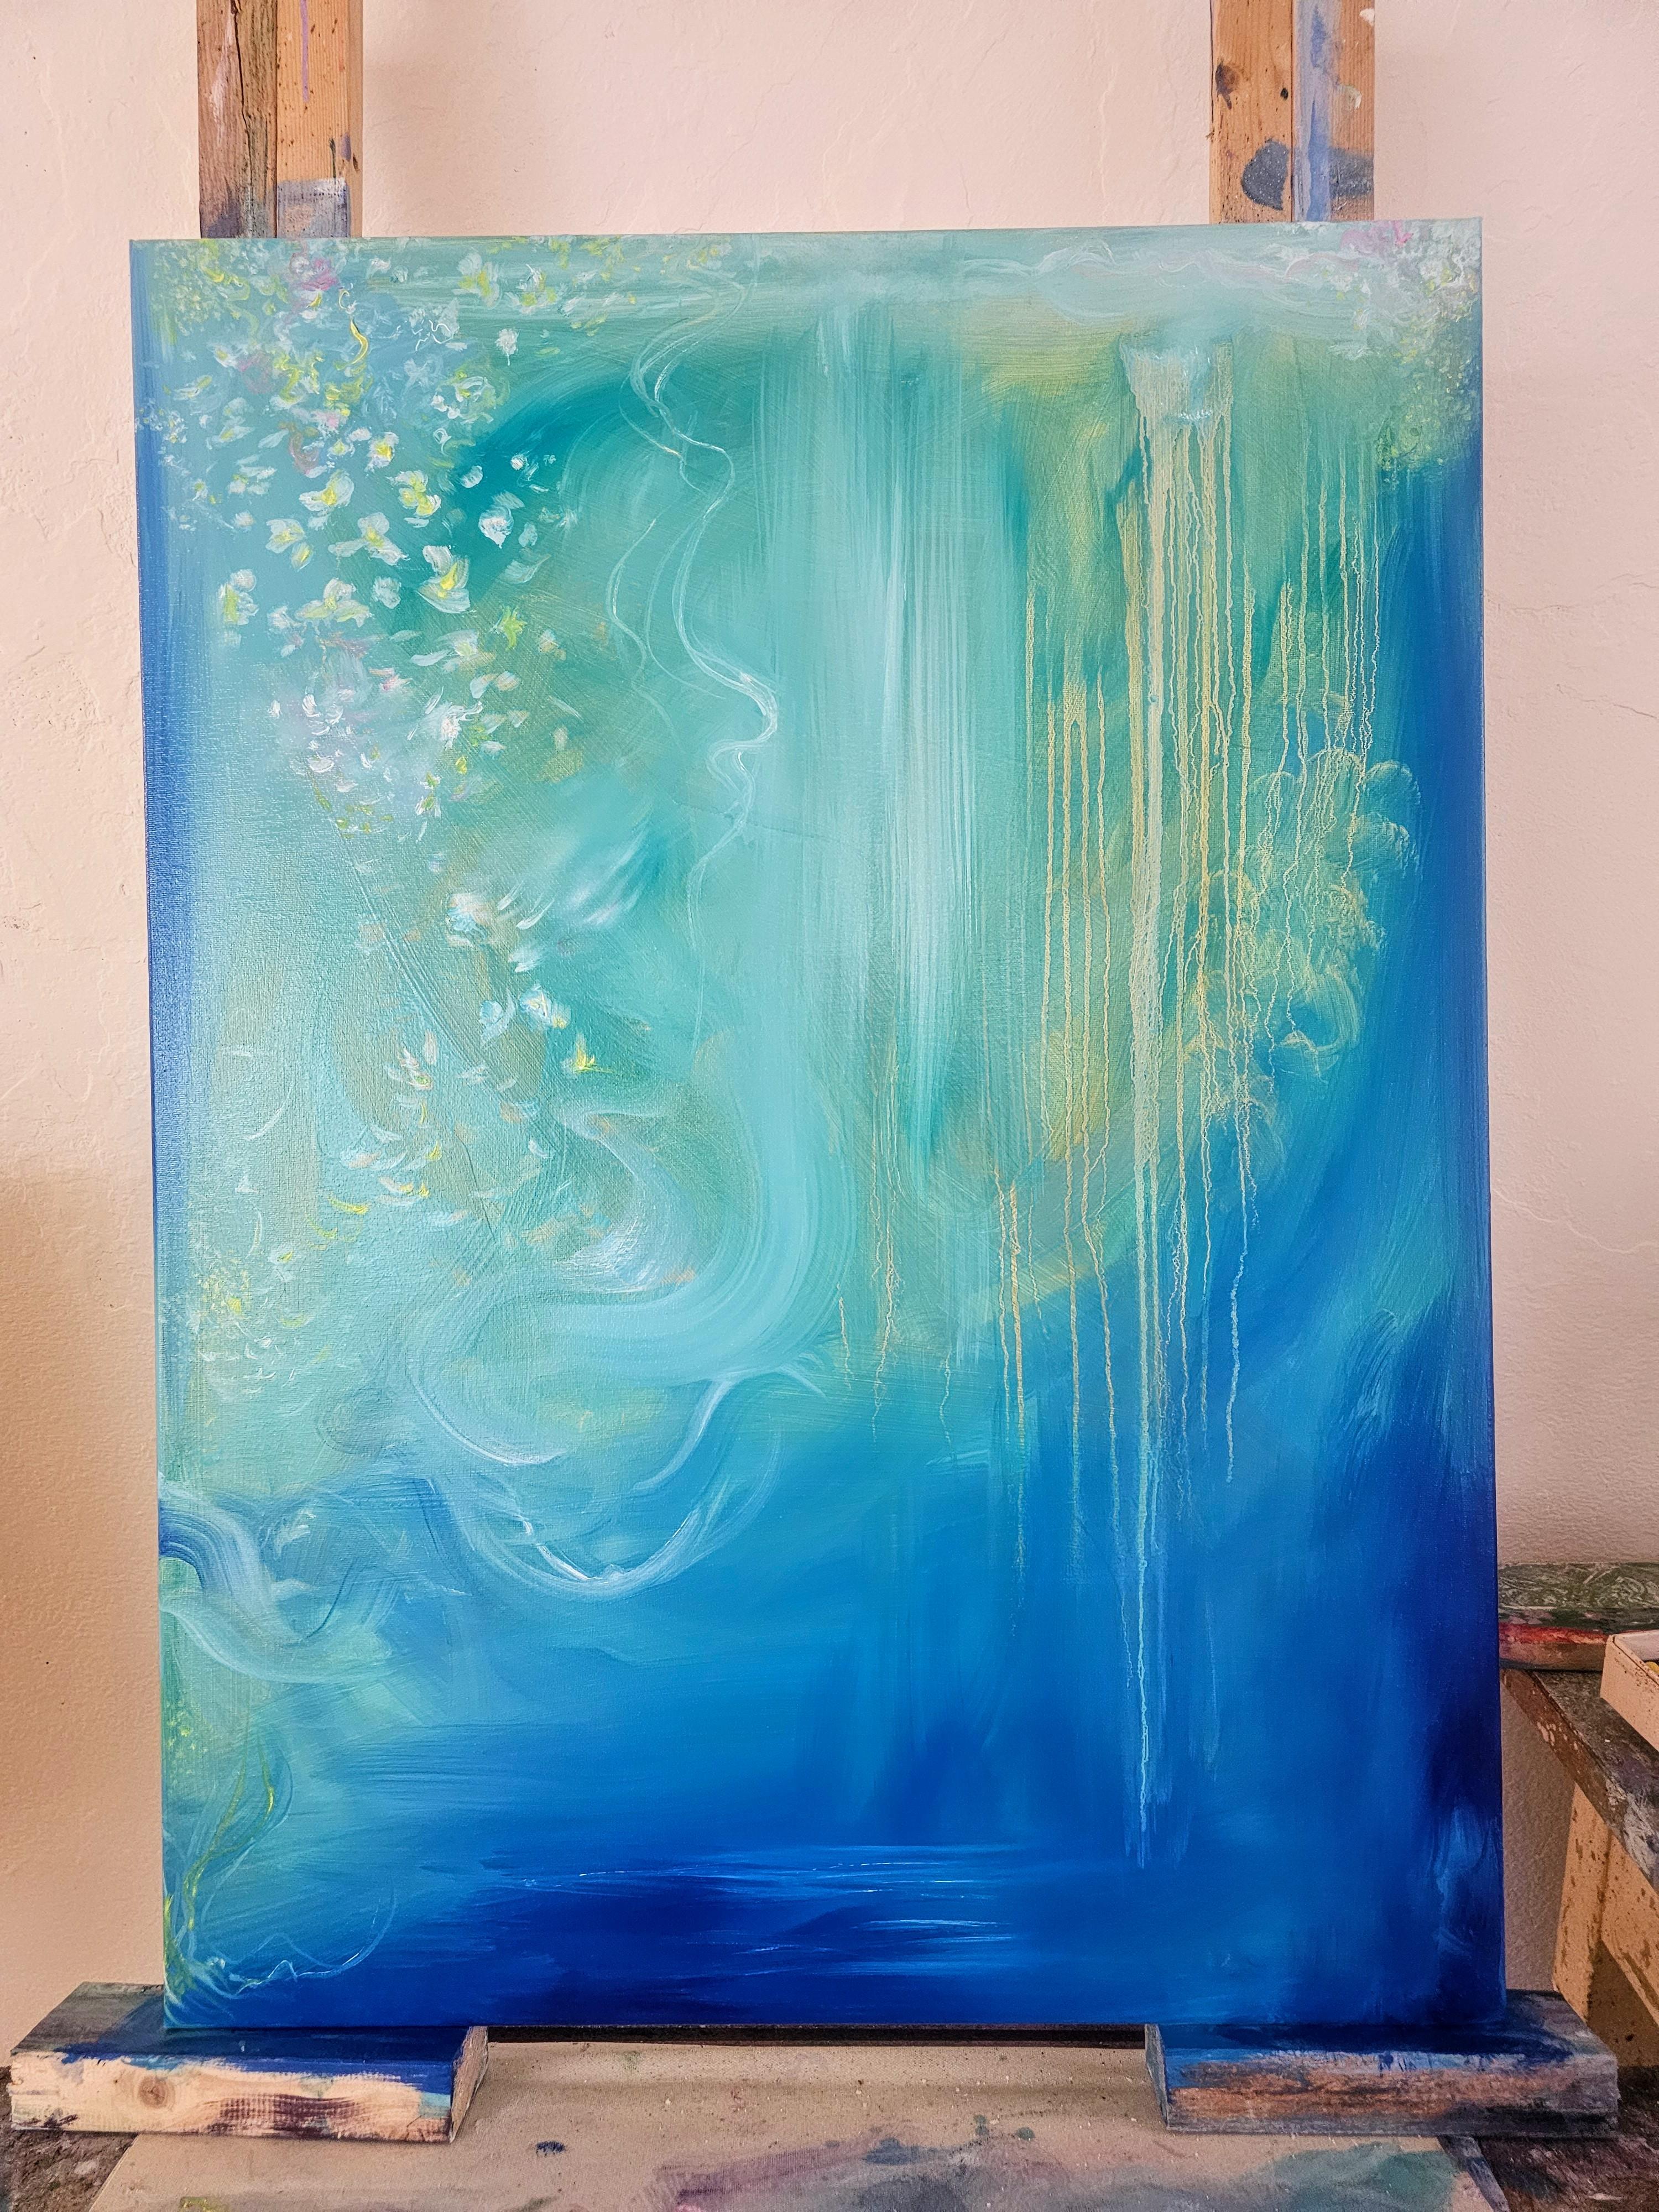 Jasmine of the sea - blue green abstract flowy sea painting - Abstract Expressionist Painting by Jennifer L. Baker